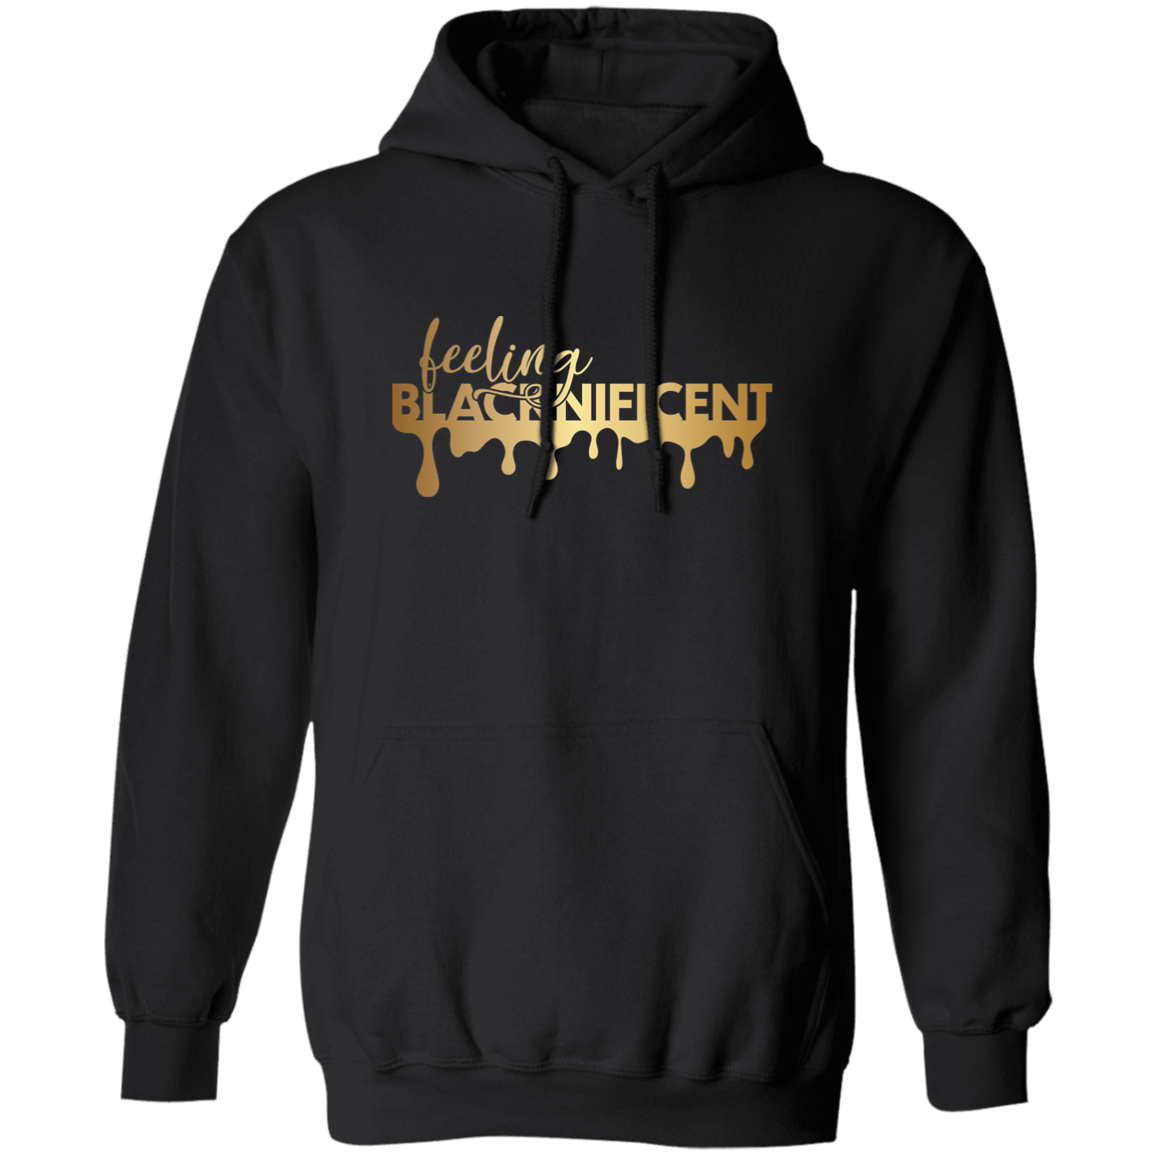 Blacknificent Pullover Hoodie